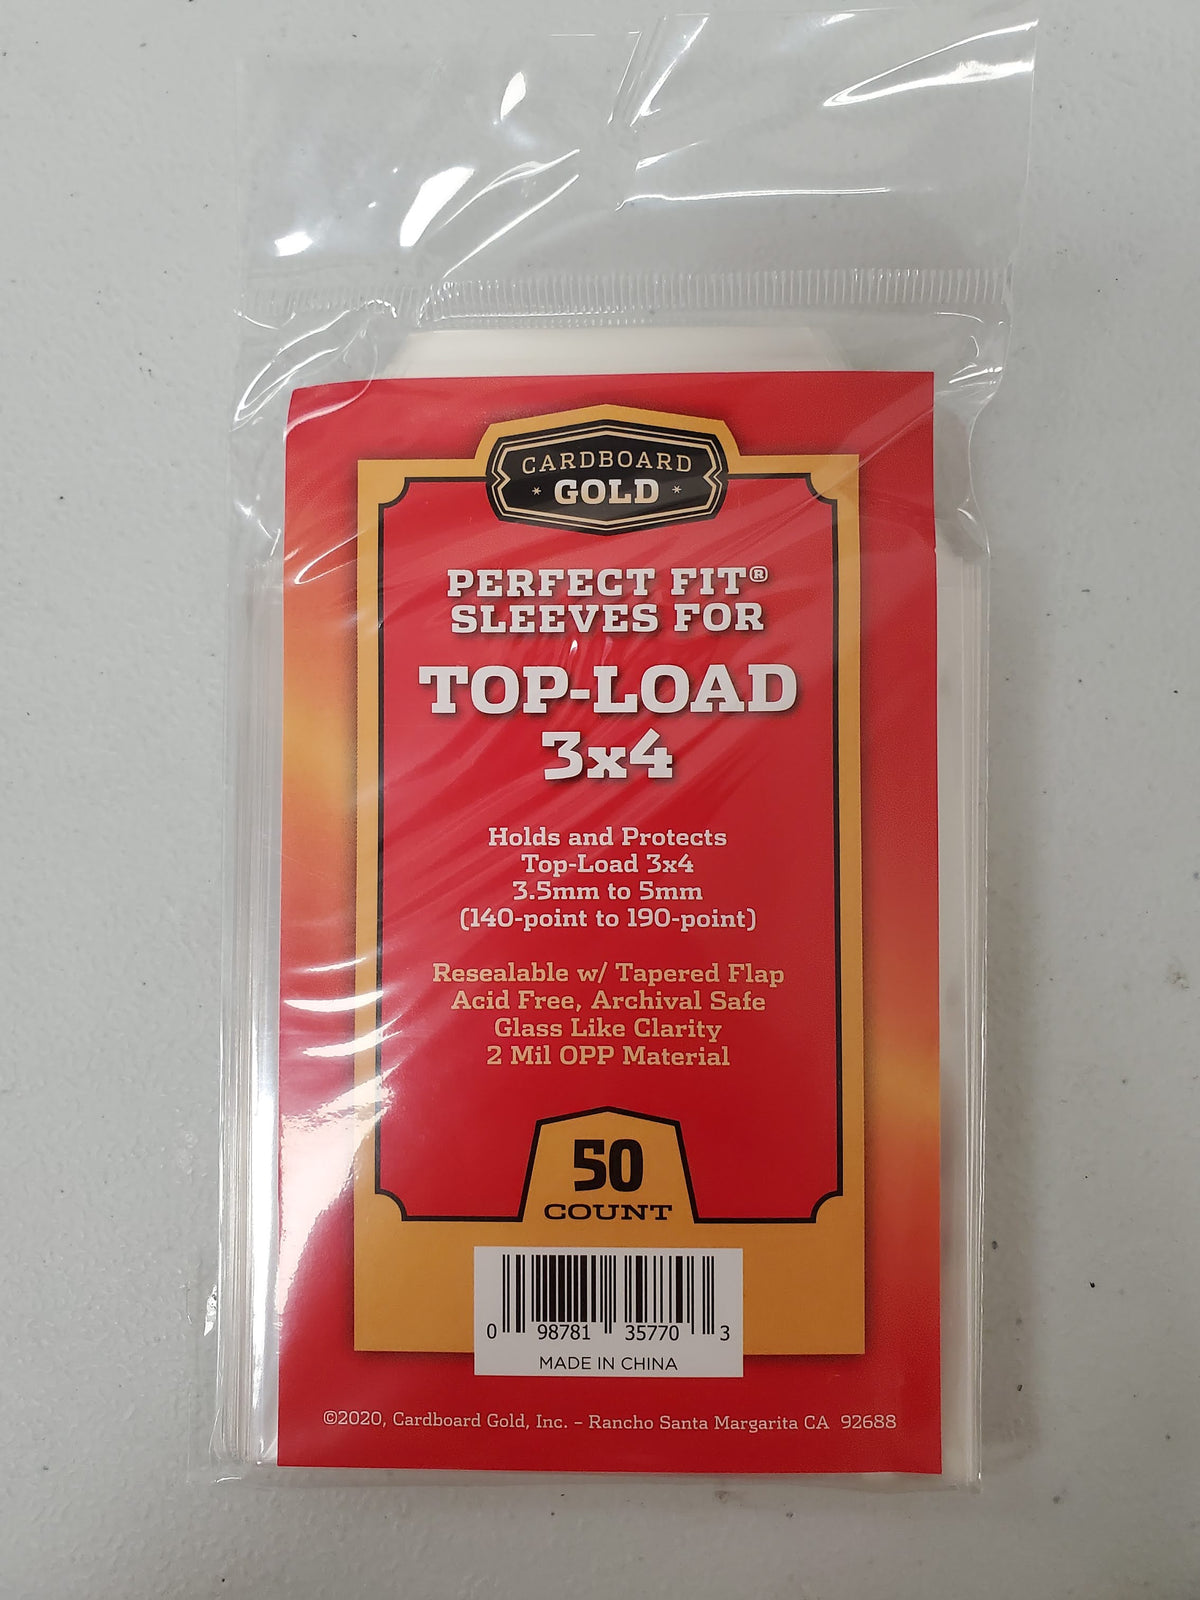 Cardboard Gold Perfect Fit Sleeves For Top-Load 3x4 (140pt to 190pt)